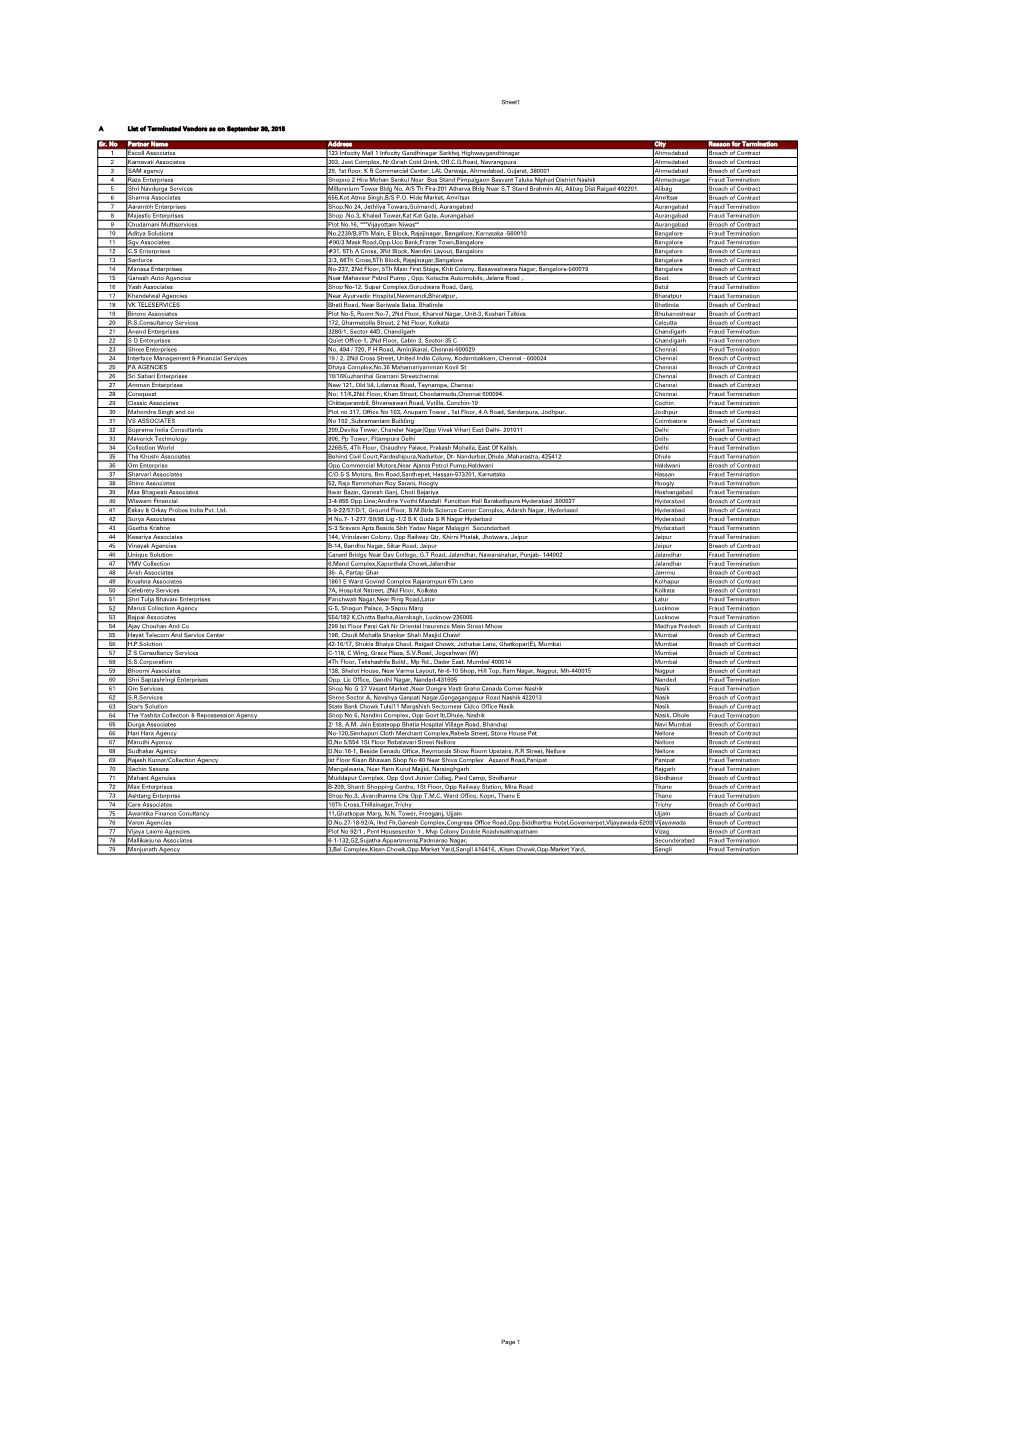 Terminated-Collection-Agency-List-Sep-2015.Pdf